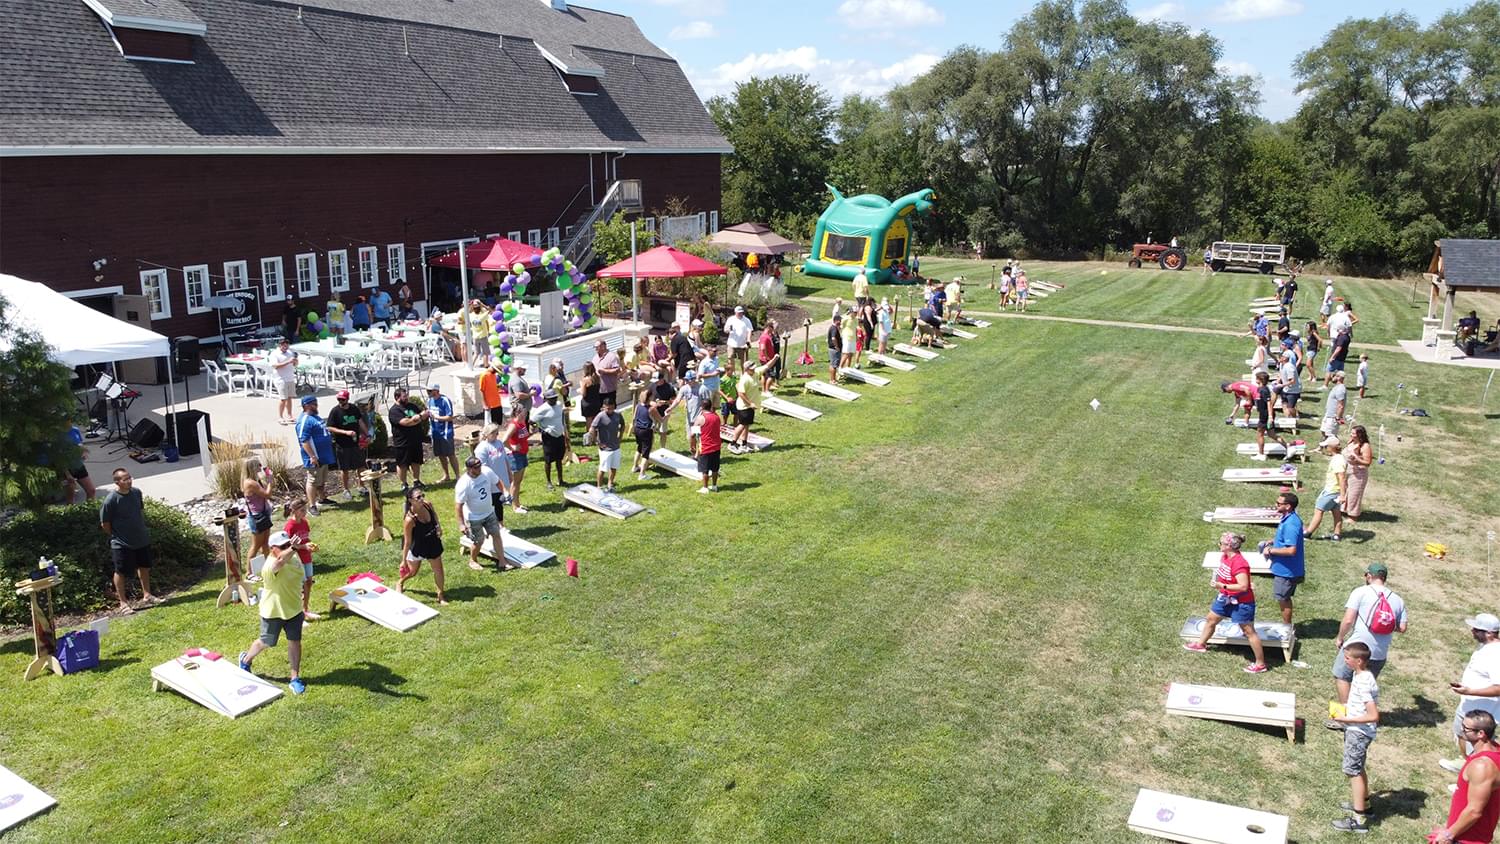 Drone view o the cornhole tournament. We see a large red barn in the background. In front of the bar there is a patio with chairs, a stage, and balloons. In front of that is a large grass area where there are rows of cornhole games lined up and people on either side playing cornhole. 